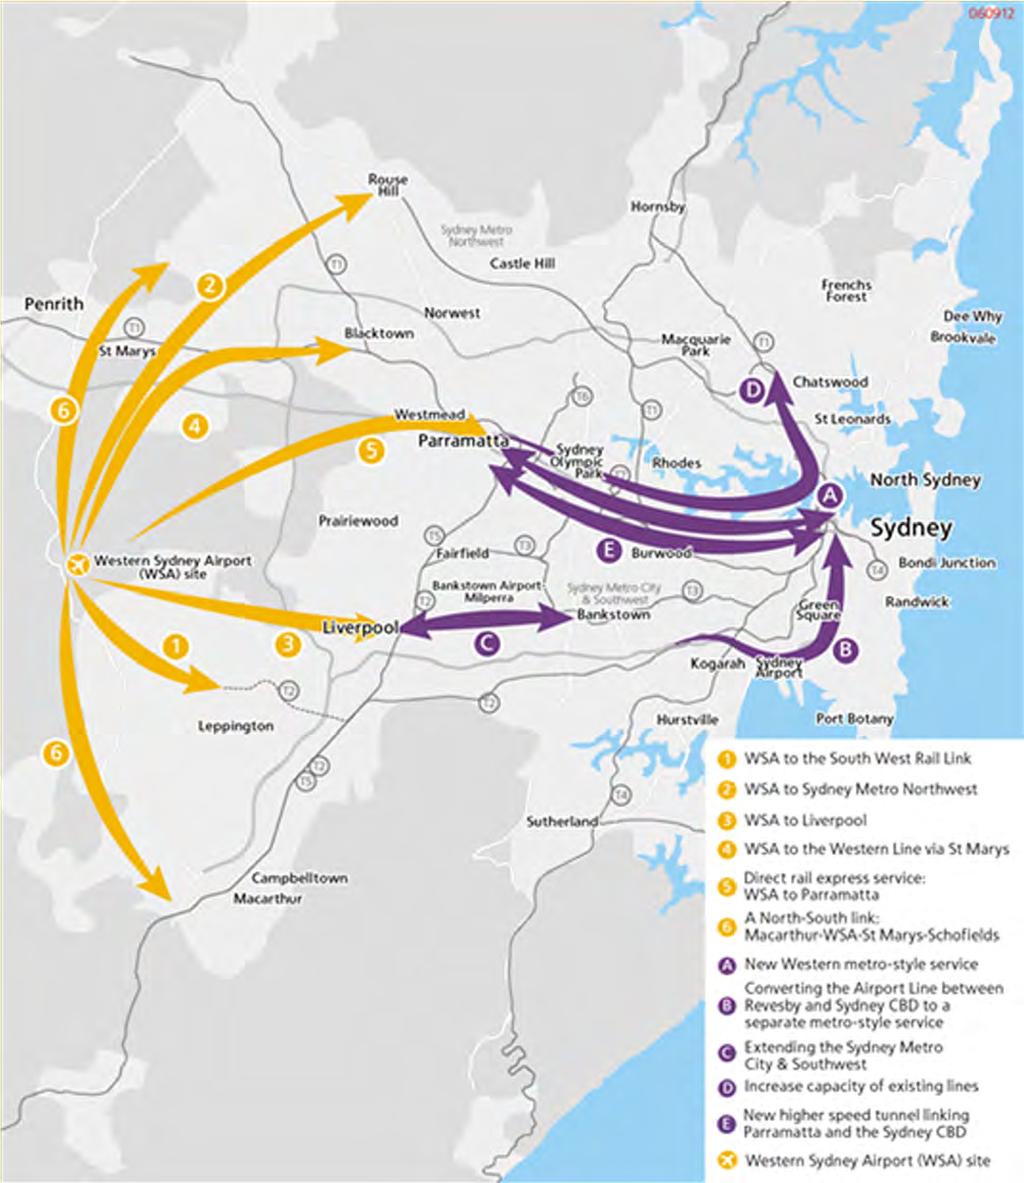 What needs to happen Figure 13: Route options being considered as part of the Western Sydney rail scoping study Source: Department of Infrastructure and Regional Development 2017, Western